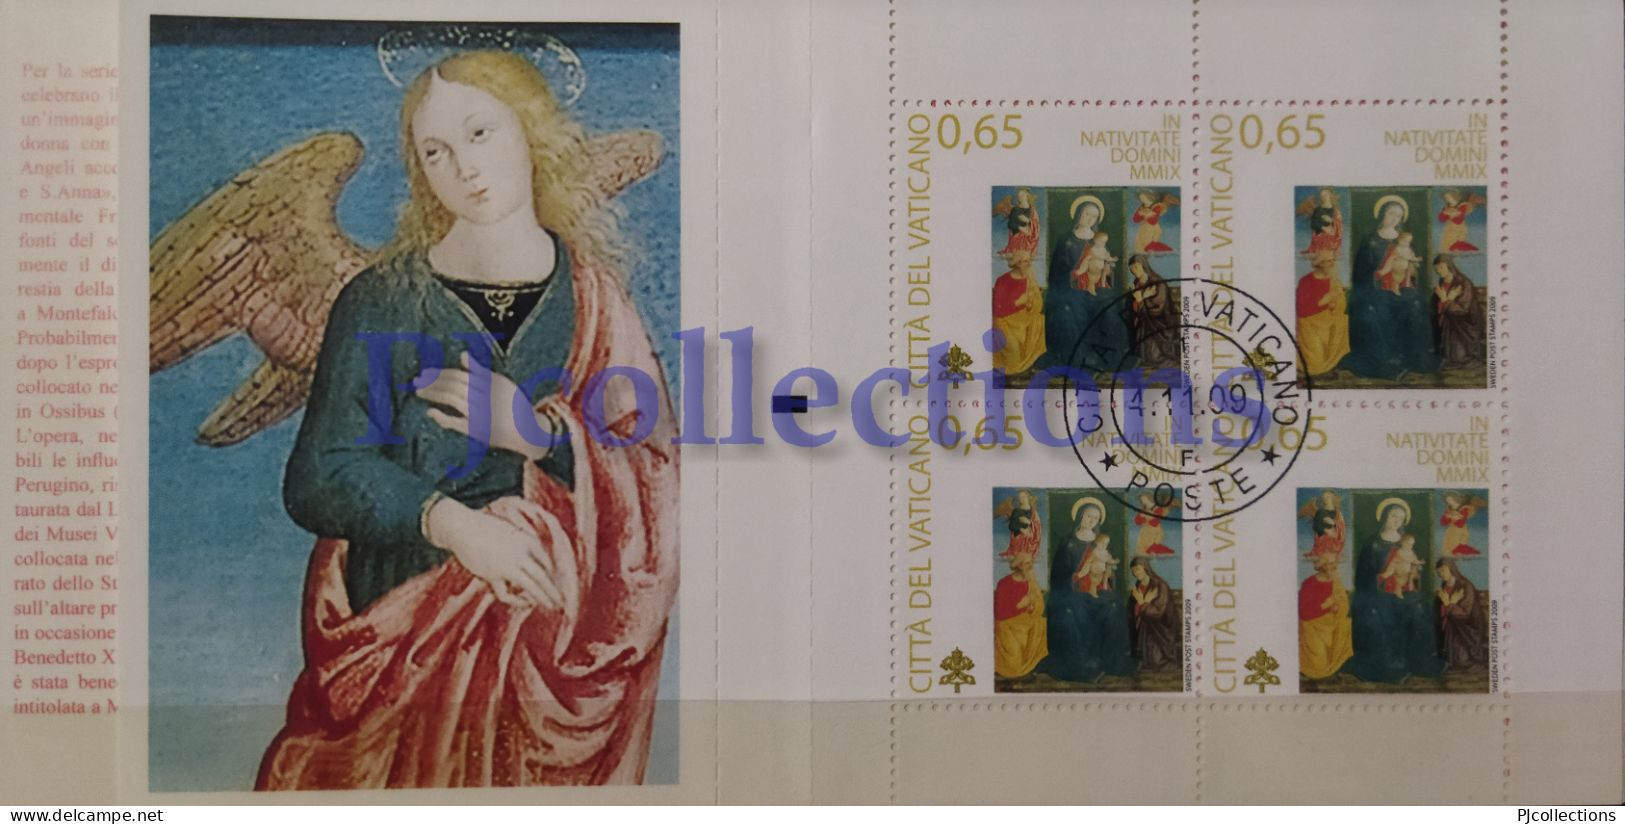 3763- VATICANO- VATICAN CITY 2009 NATALE - CHRISTMAS FULL BOOKLET 4 STAMPS C/ANNULLO 1° GIORNO - USED - Usados